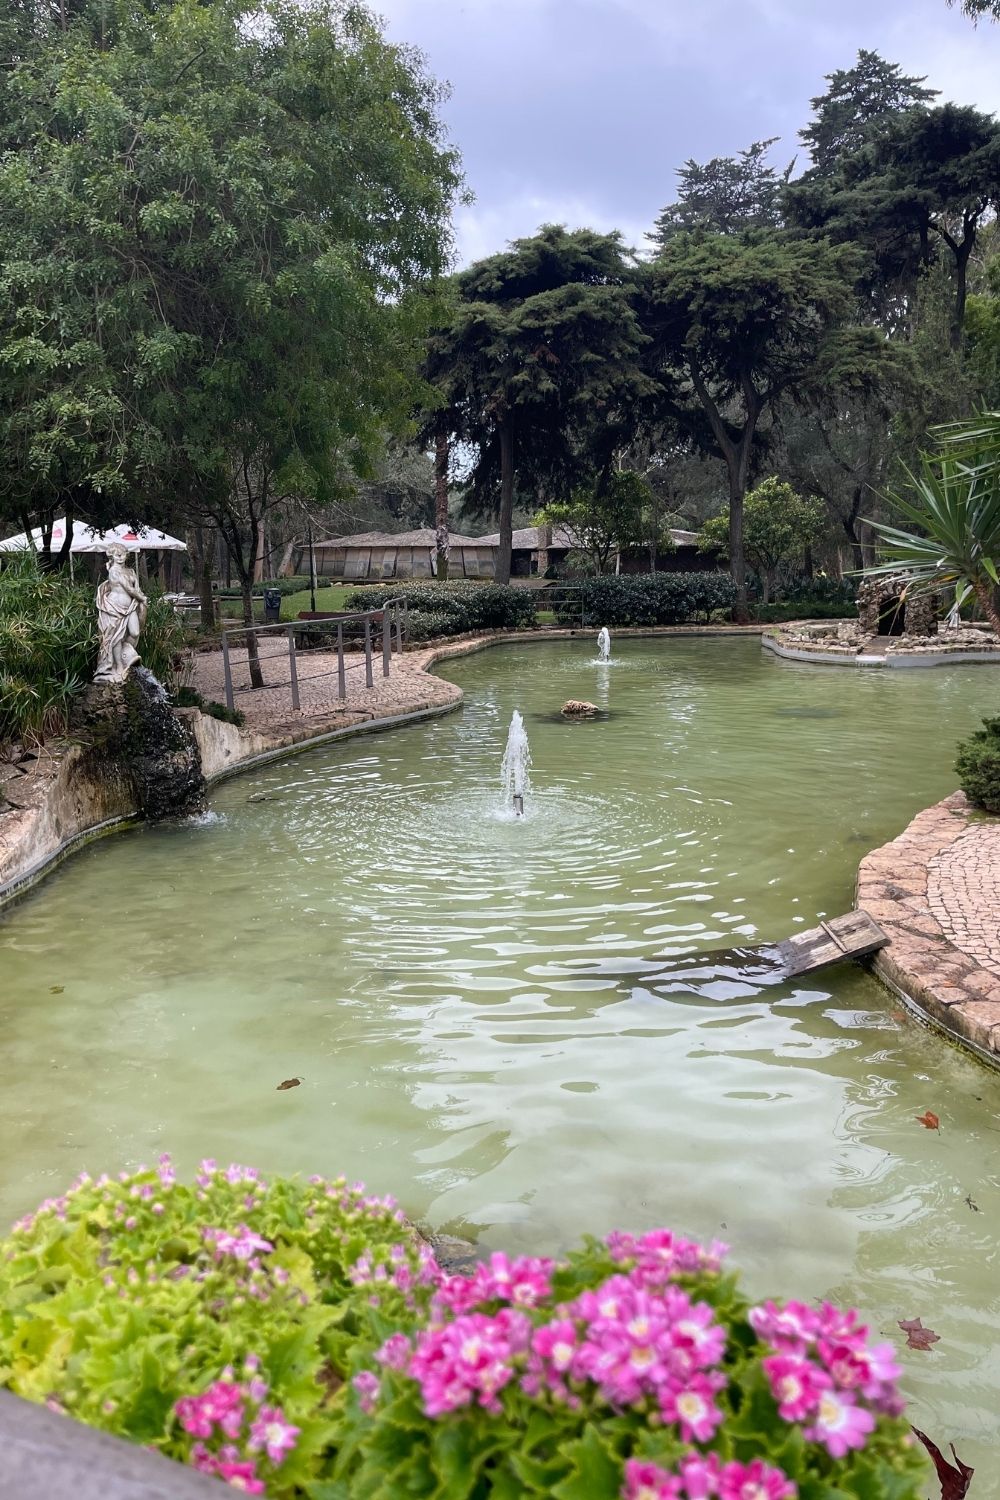 This image captures a classical garden scene featuring a green pond with a fountain, surrounded by trees, flowers, and a classical statue, contributing to an air of elegance and tranquility. The overcast sky suggests a peaceful, contemplative environment, ideal for a leisurely stroll.